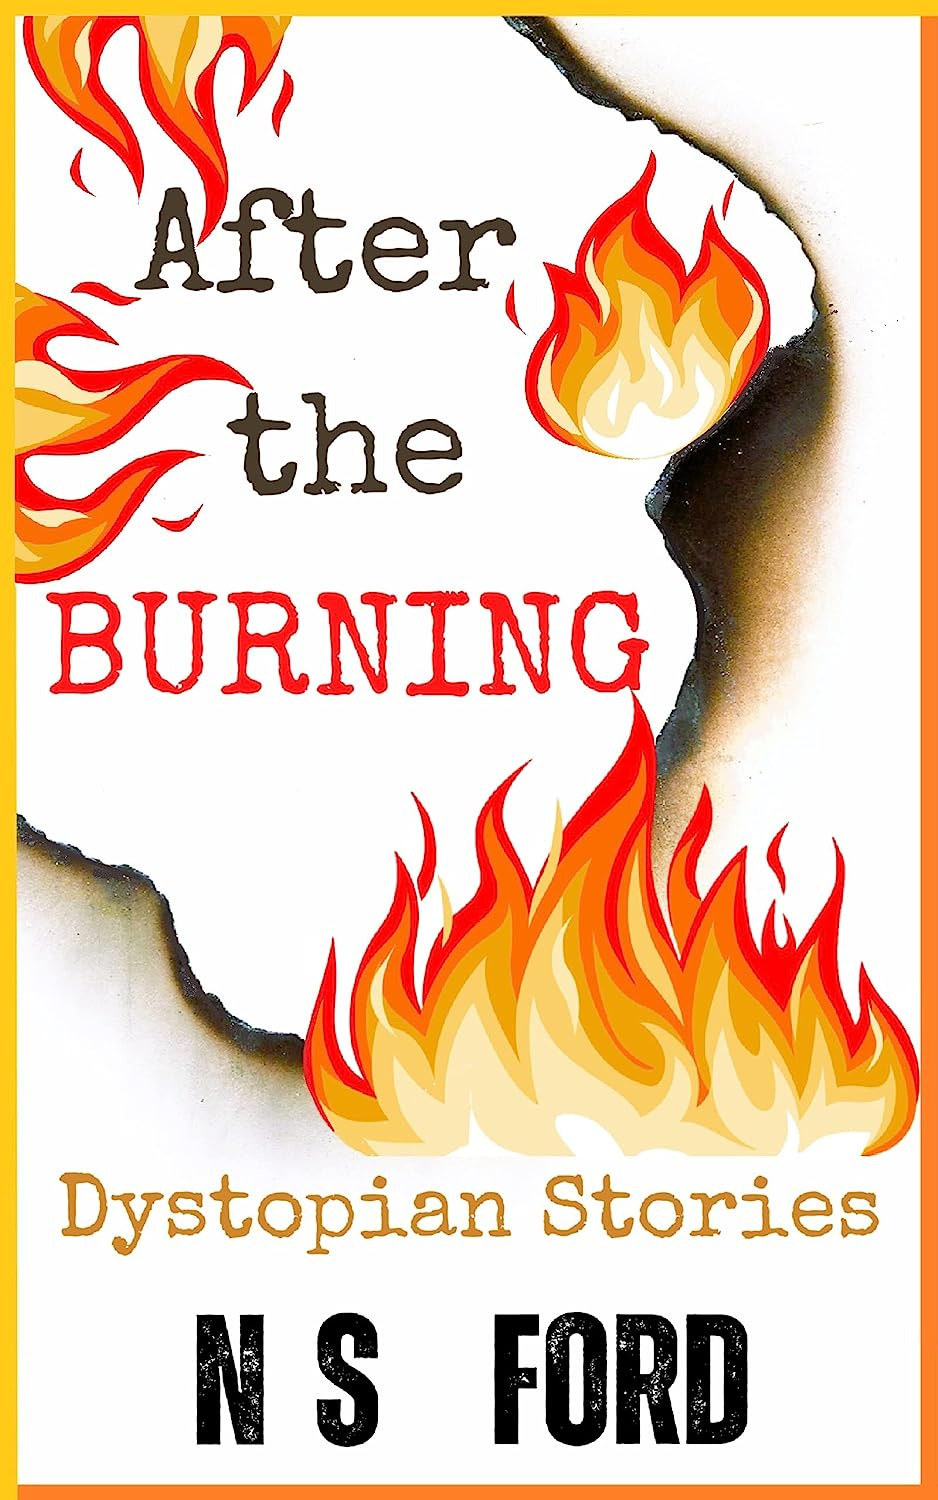 Book cover of After the Burning by N S Ford, showing flames burning paper.